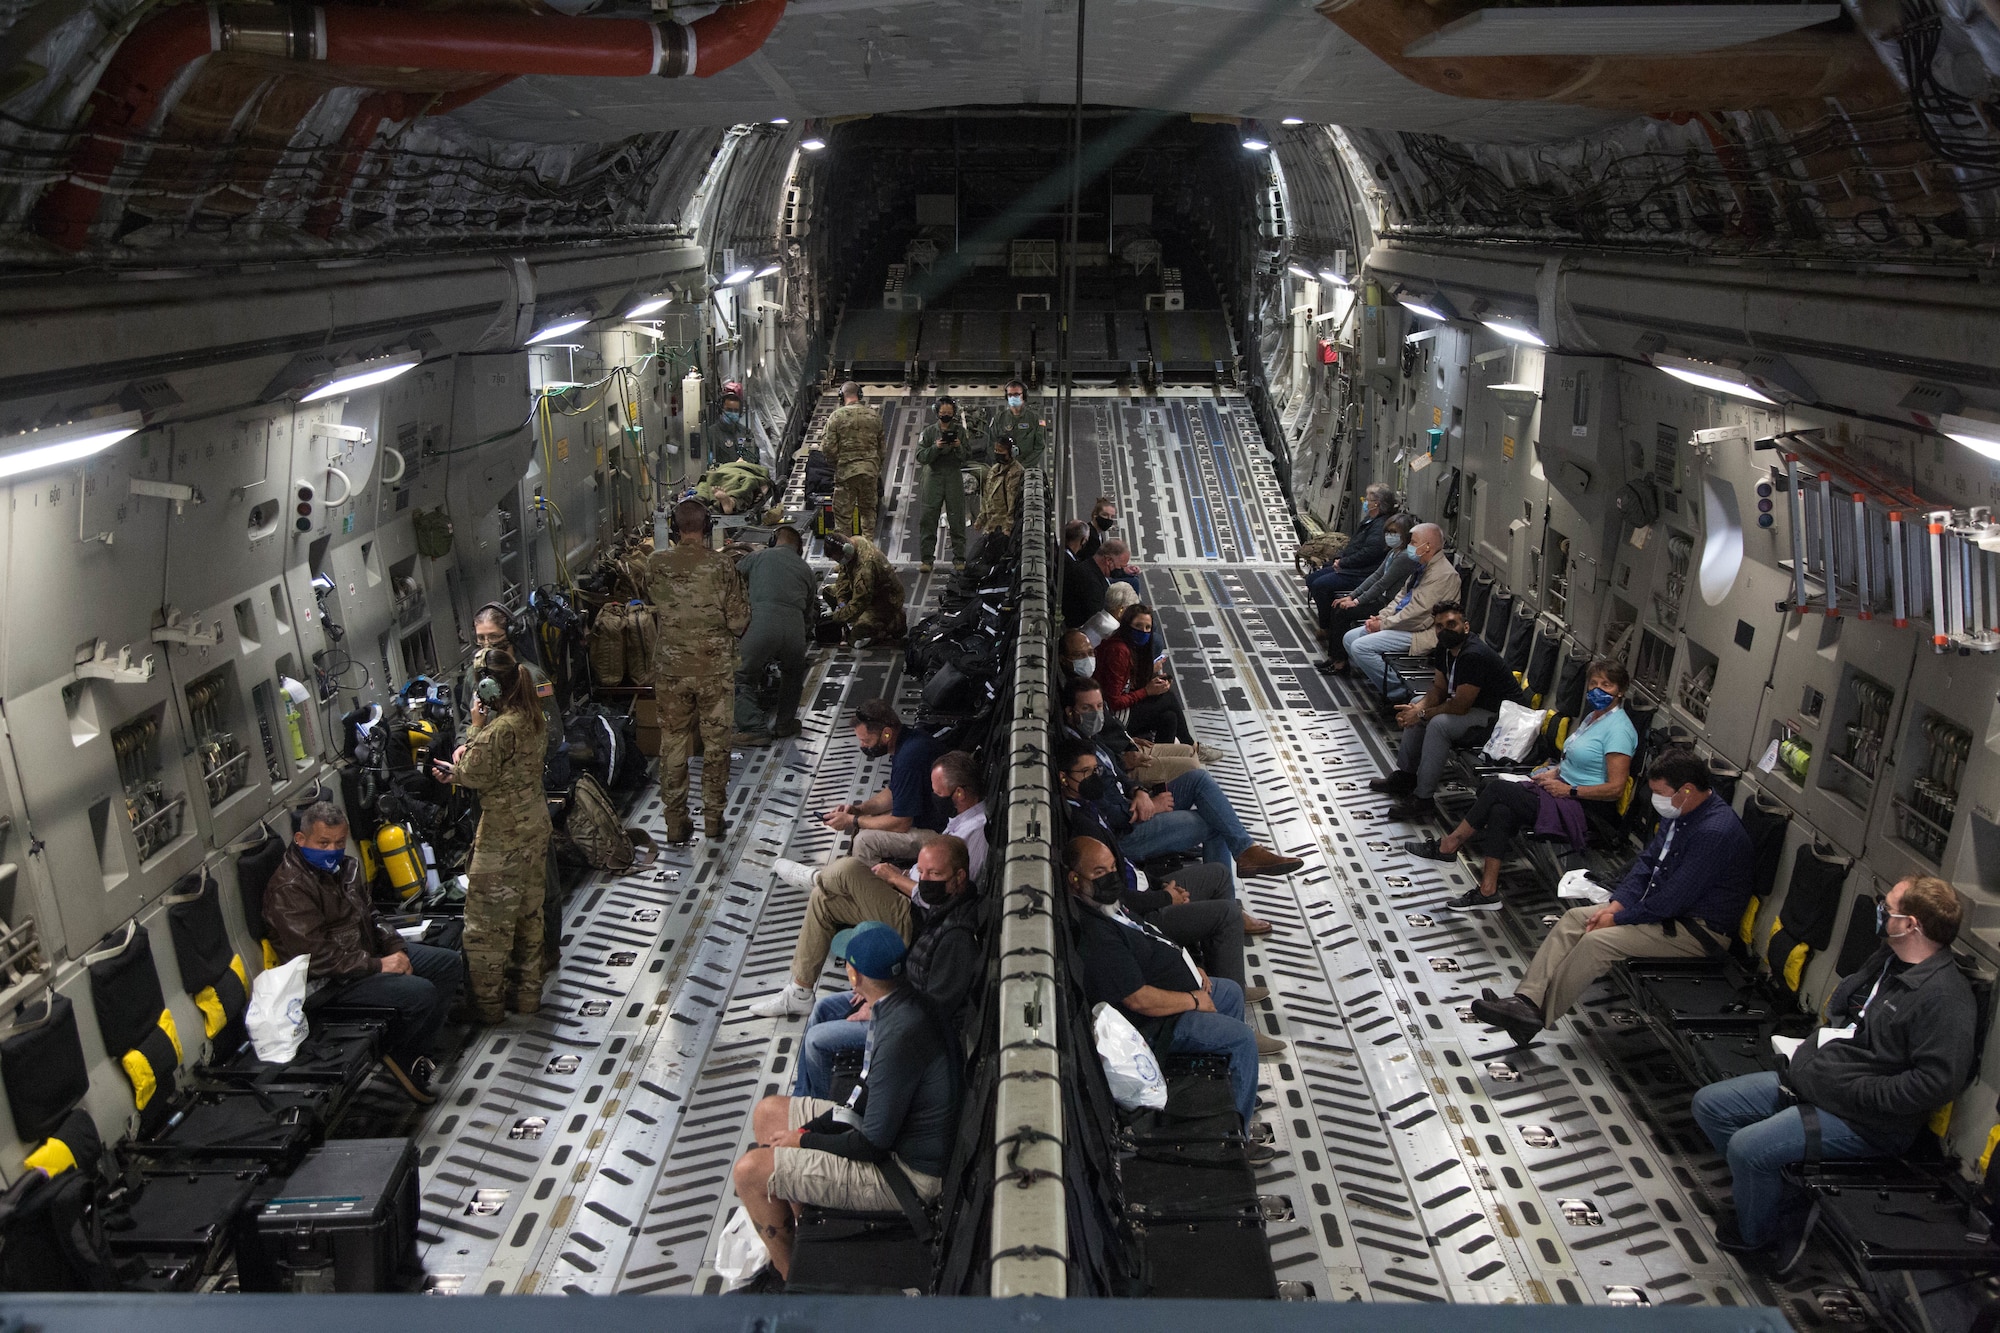 Civilian employers sit in the cargo bay of a military aircraft.